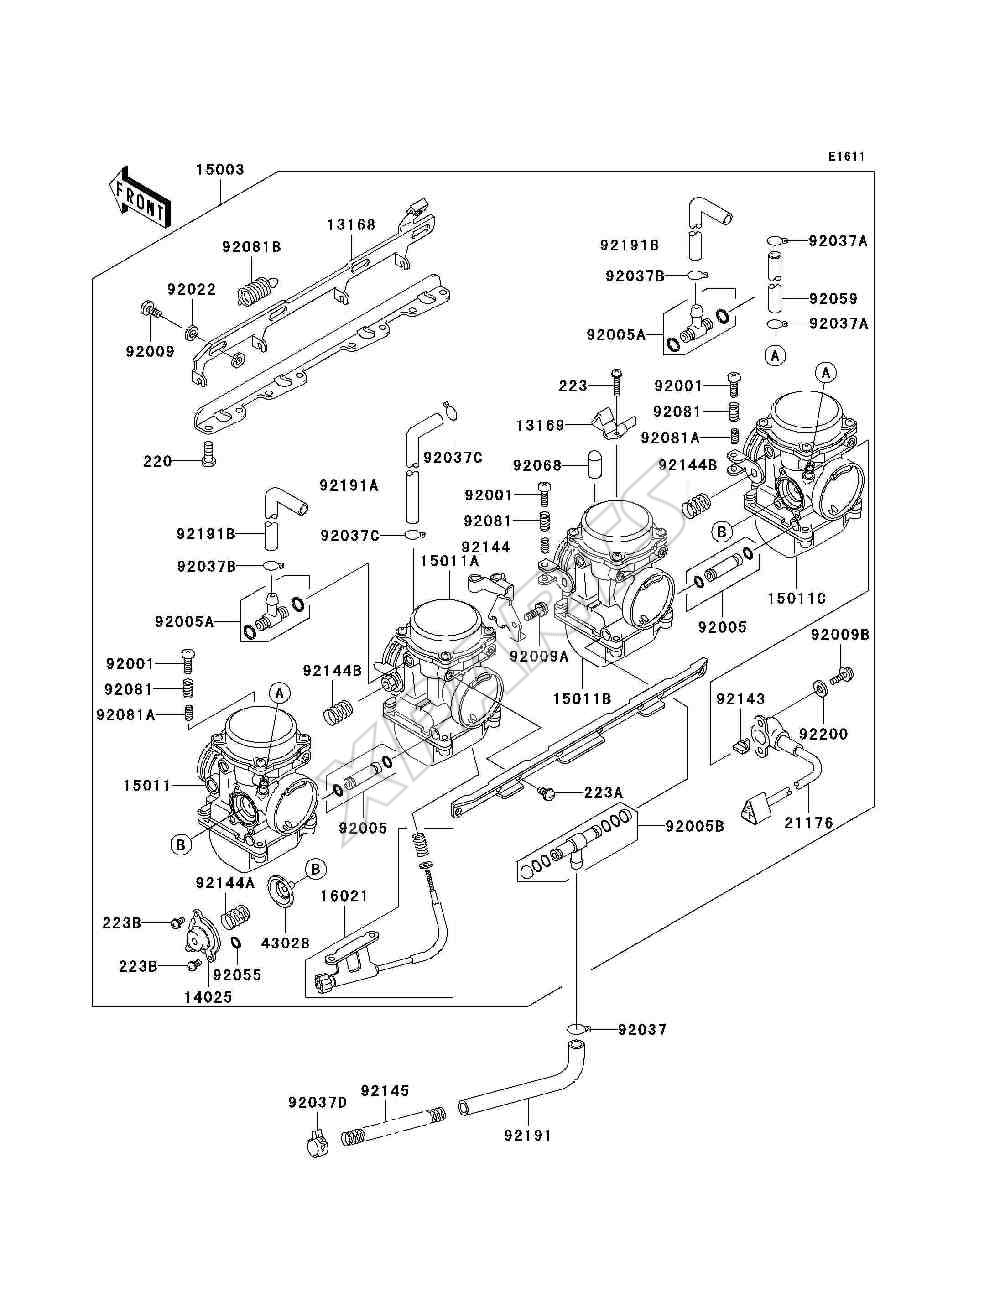 Picture for category Carburetor(CN,US)